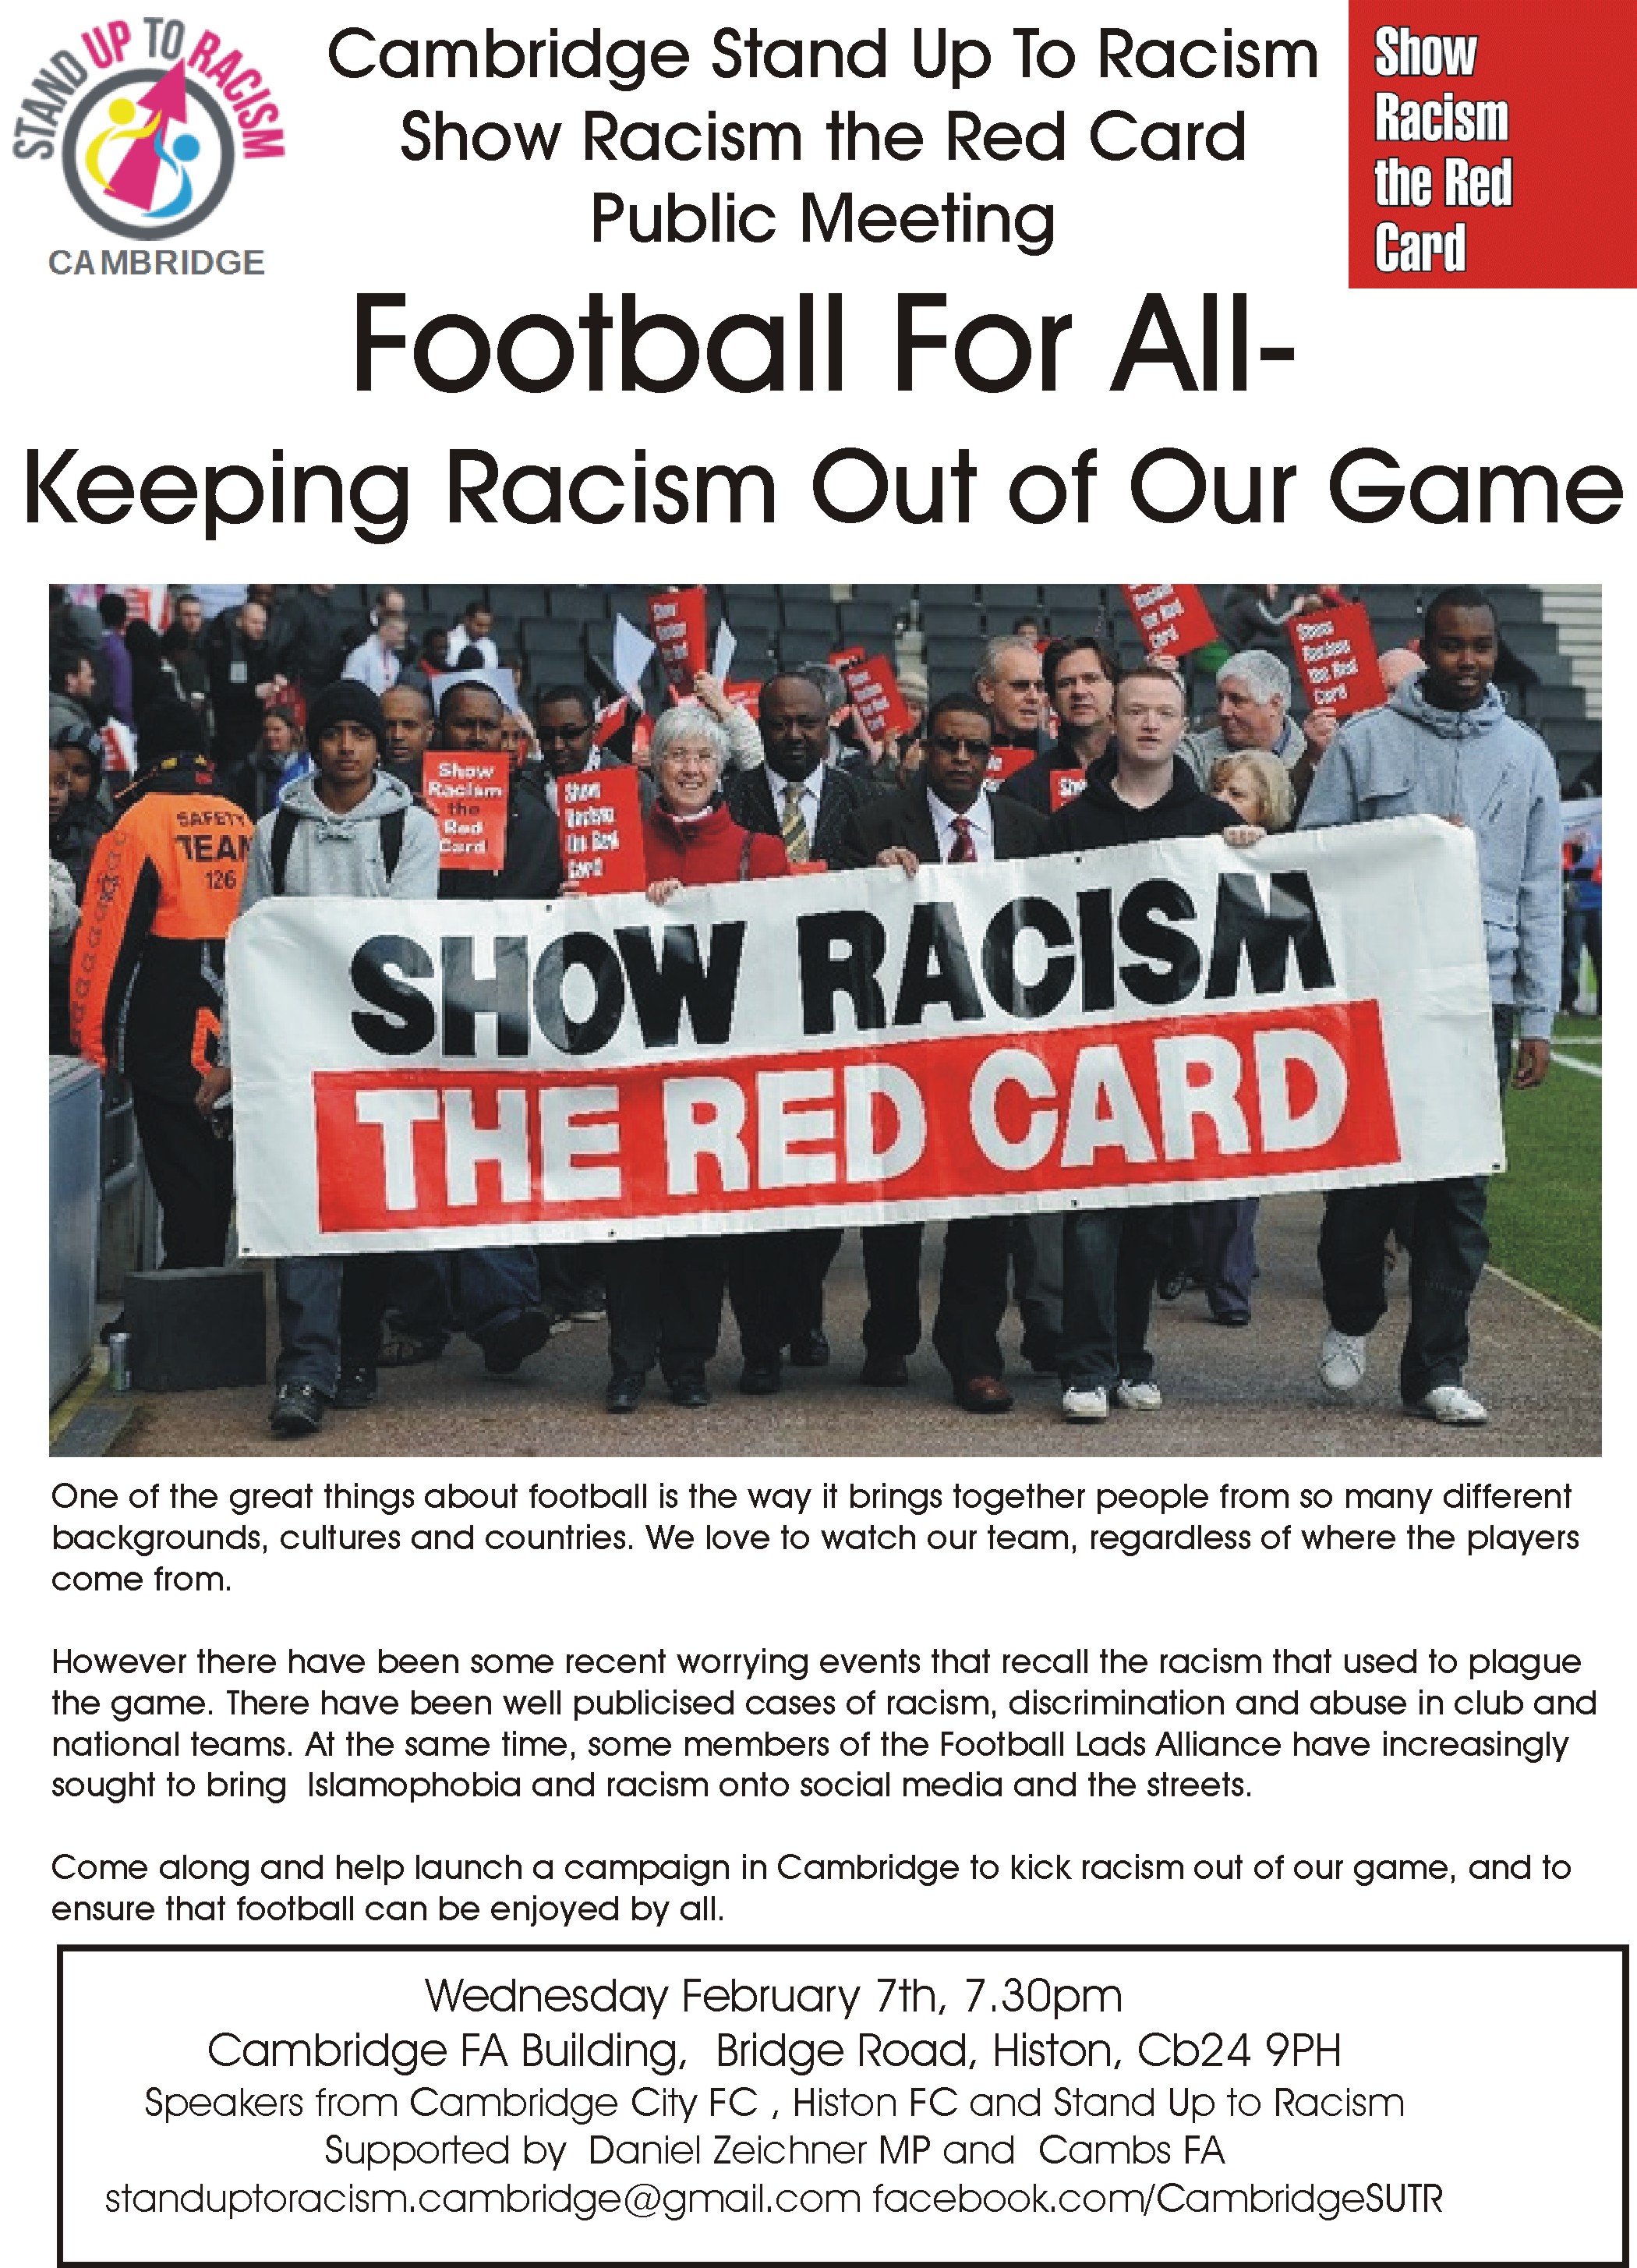 Cambs Stand Up To Racism